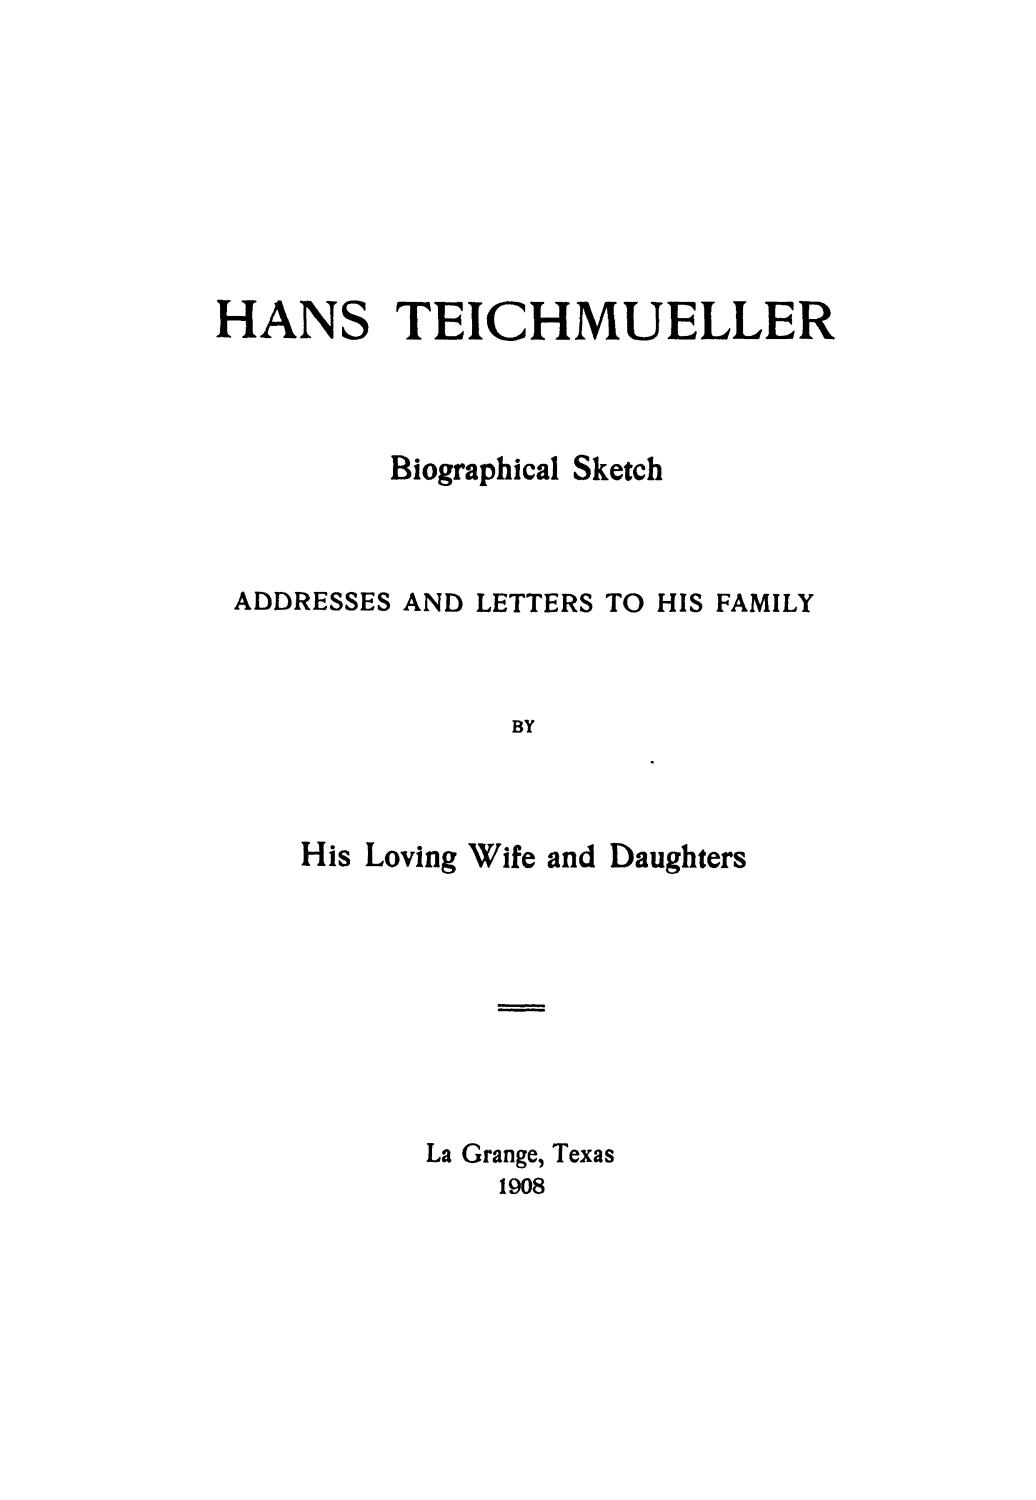 Hans Teichmueller;  biographical sketch, addresses and letters to his family
                                                
                                                    2
                                                